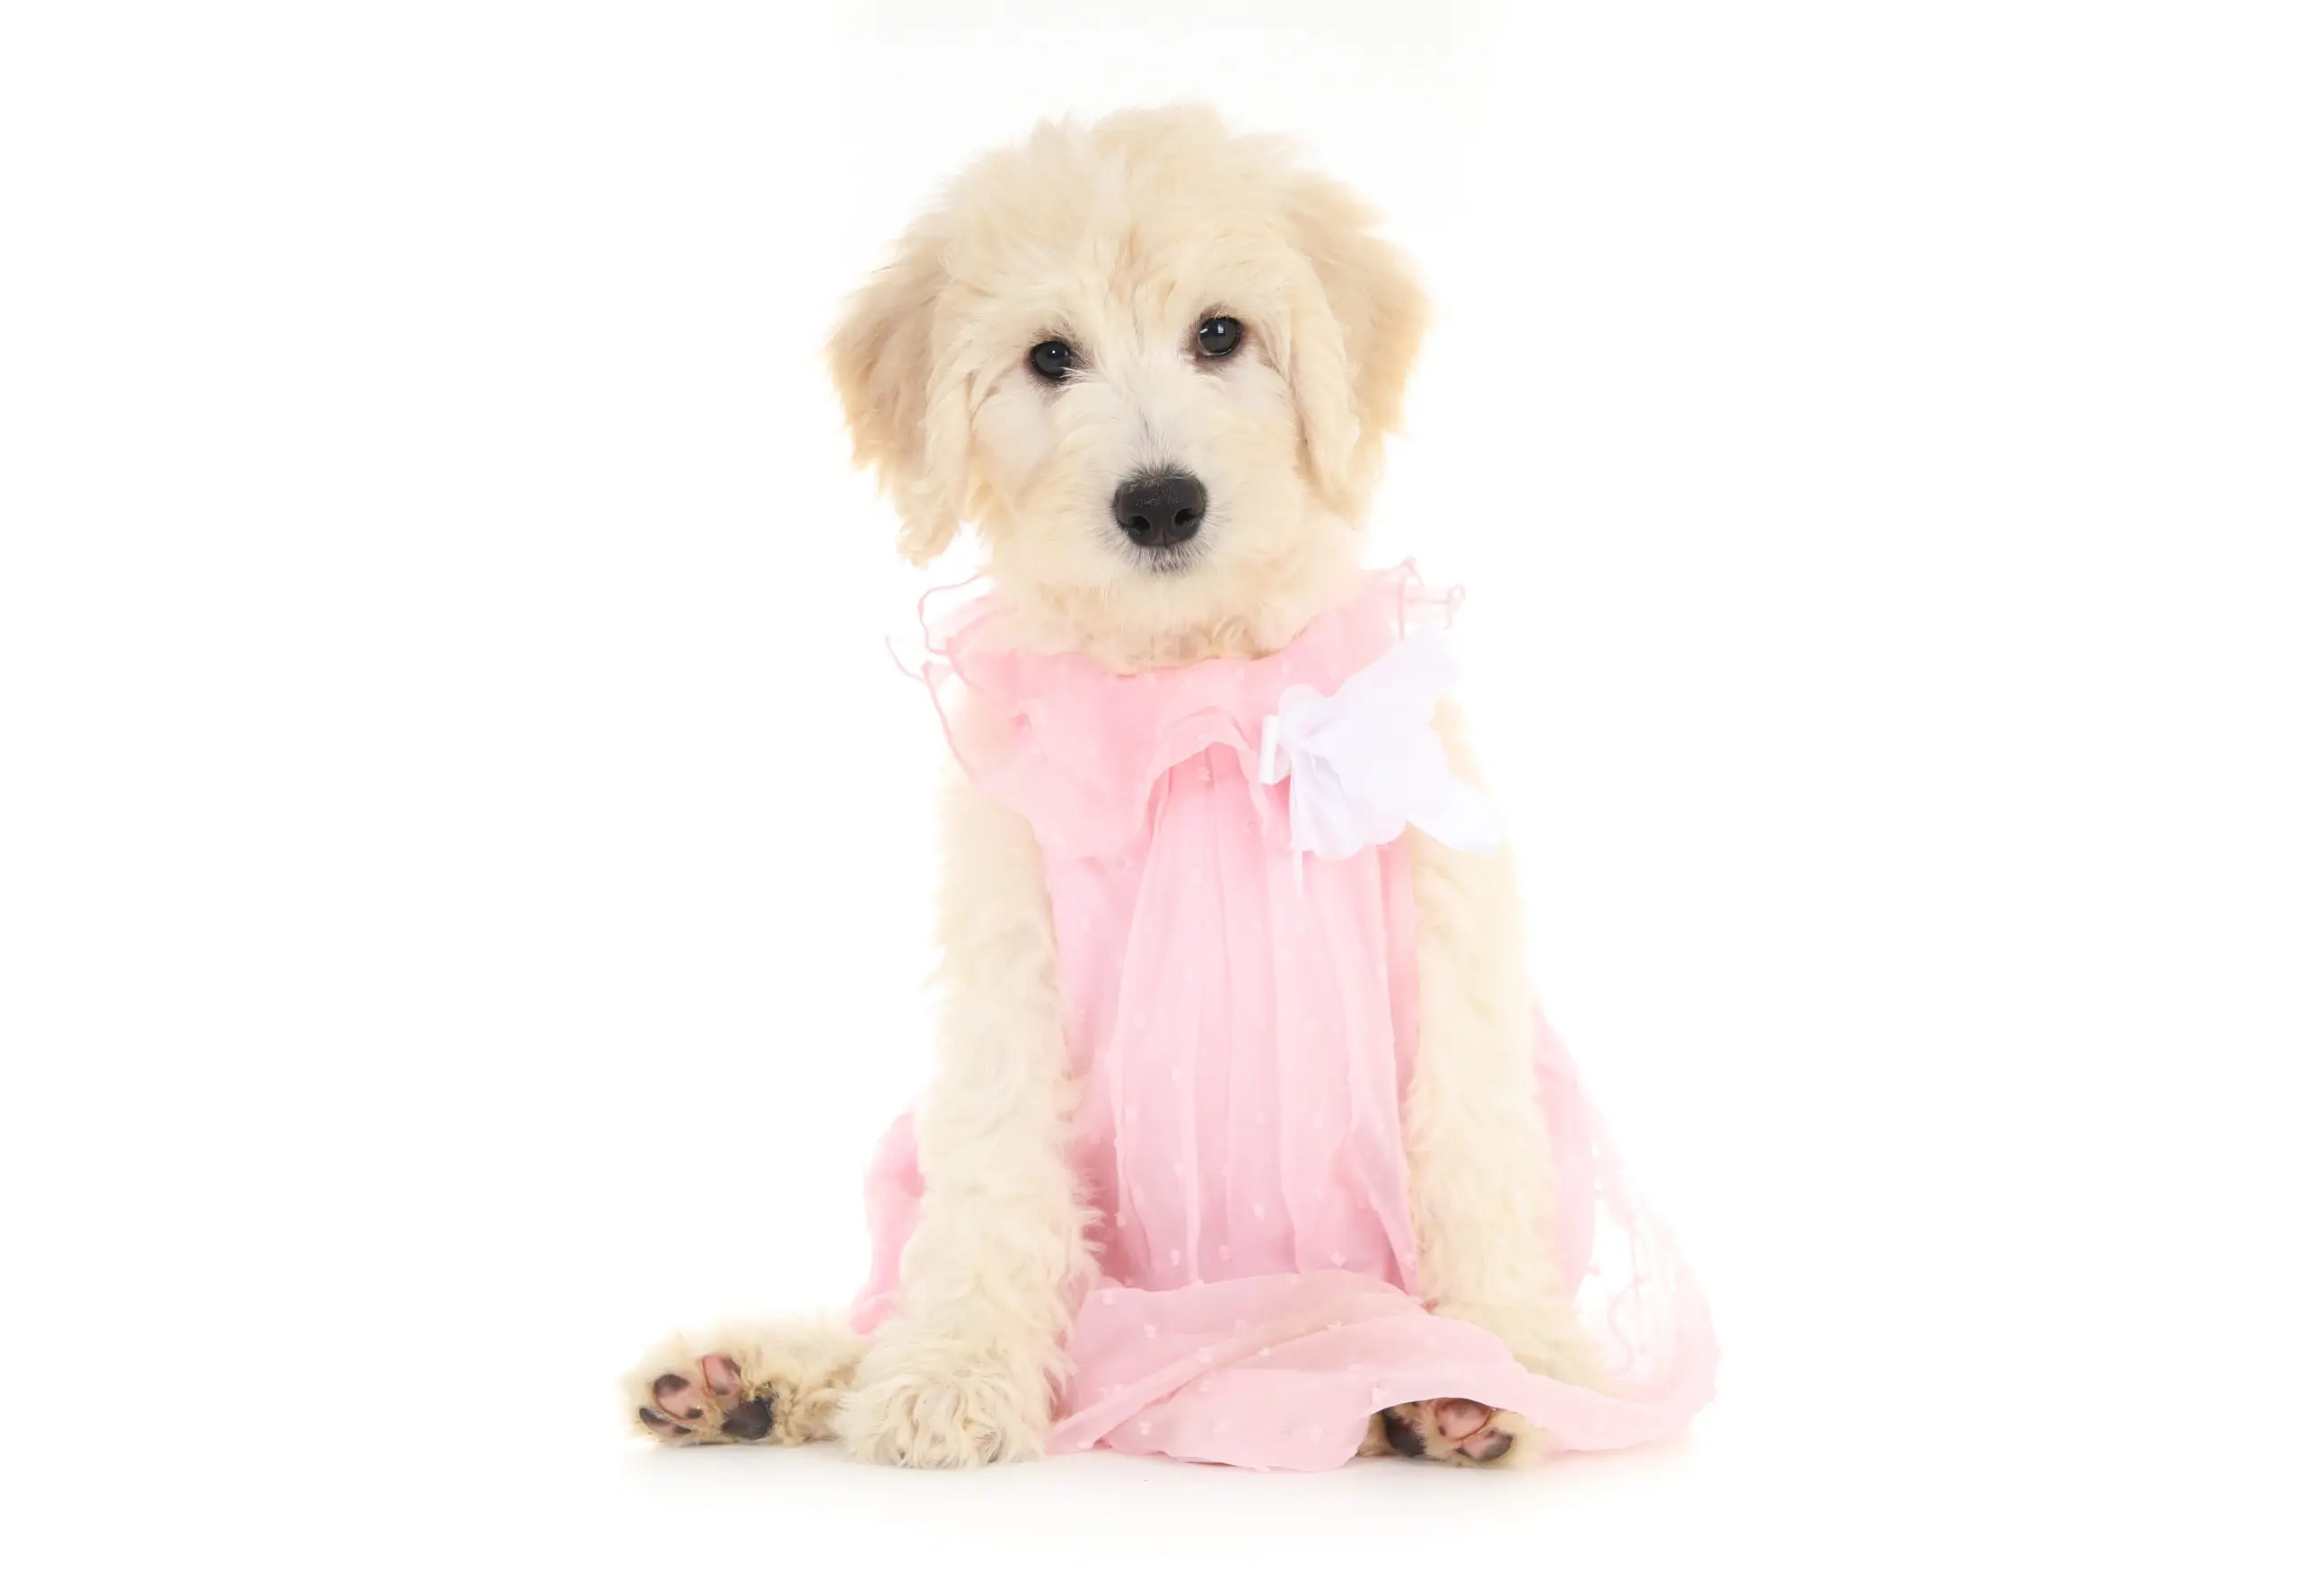 mini English teddy bear golden doodle puppy in a pink dress